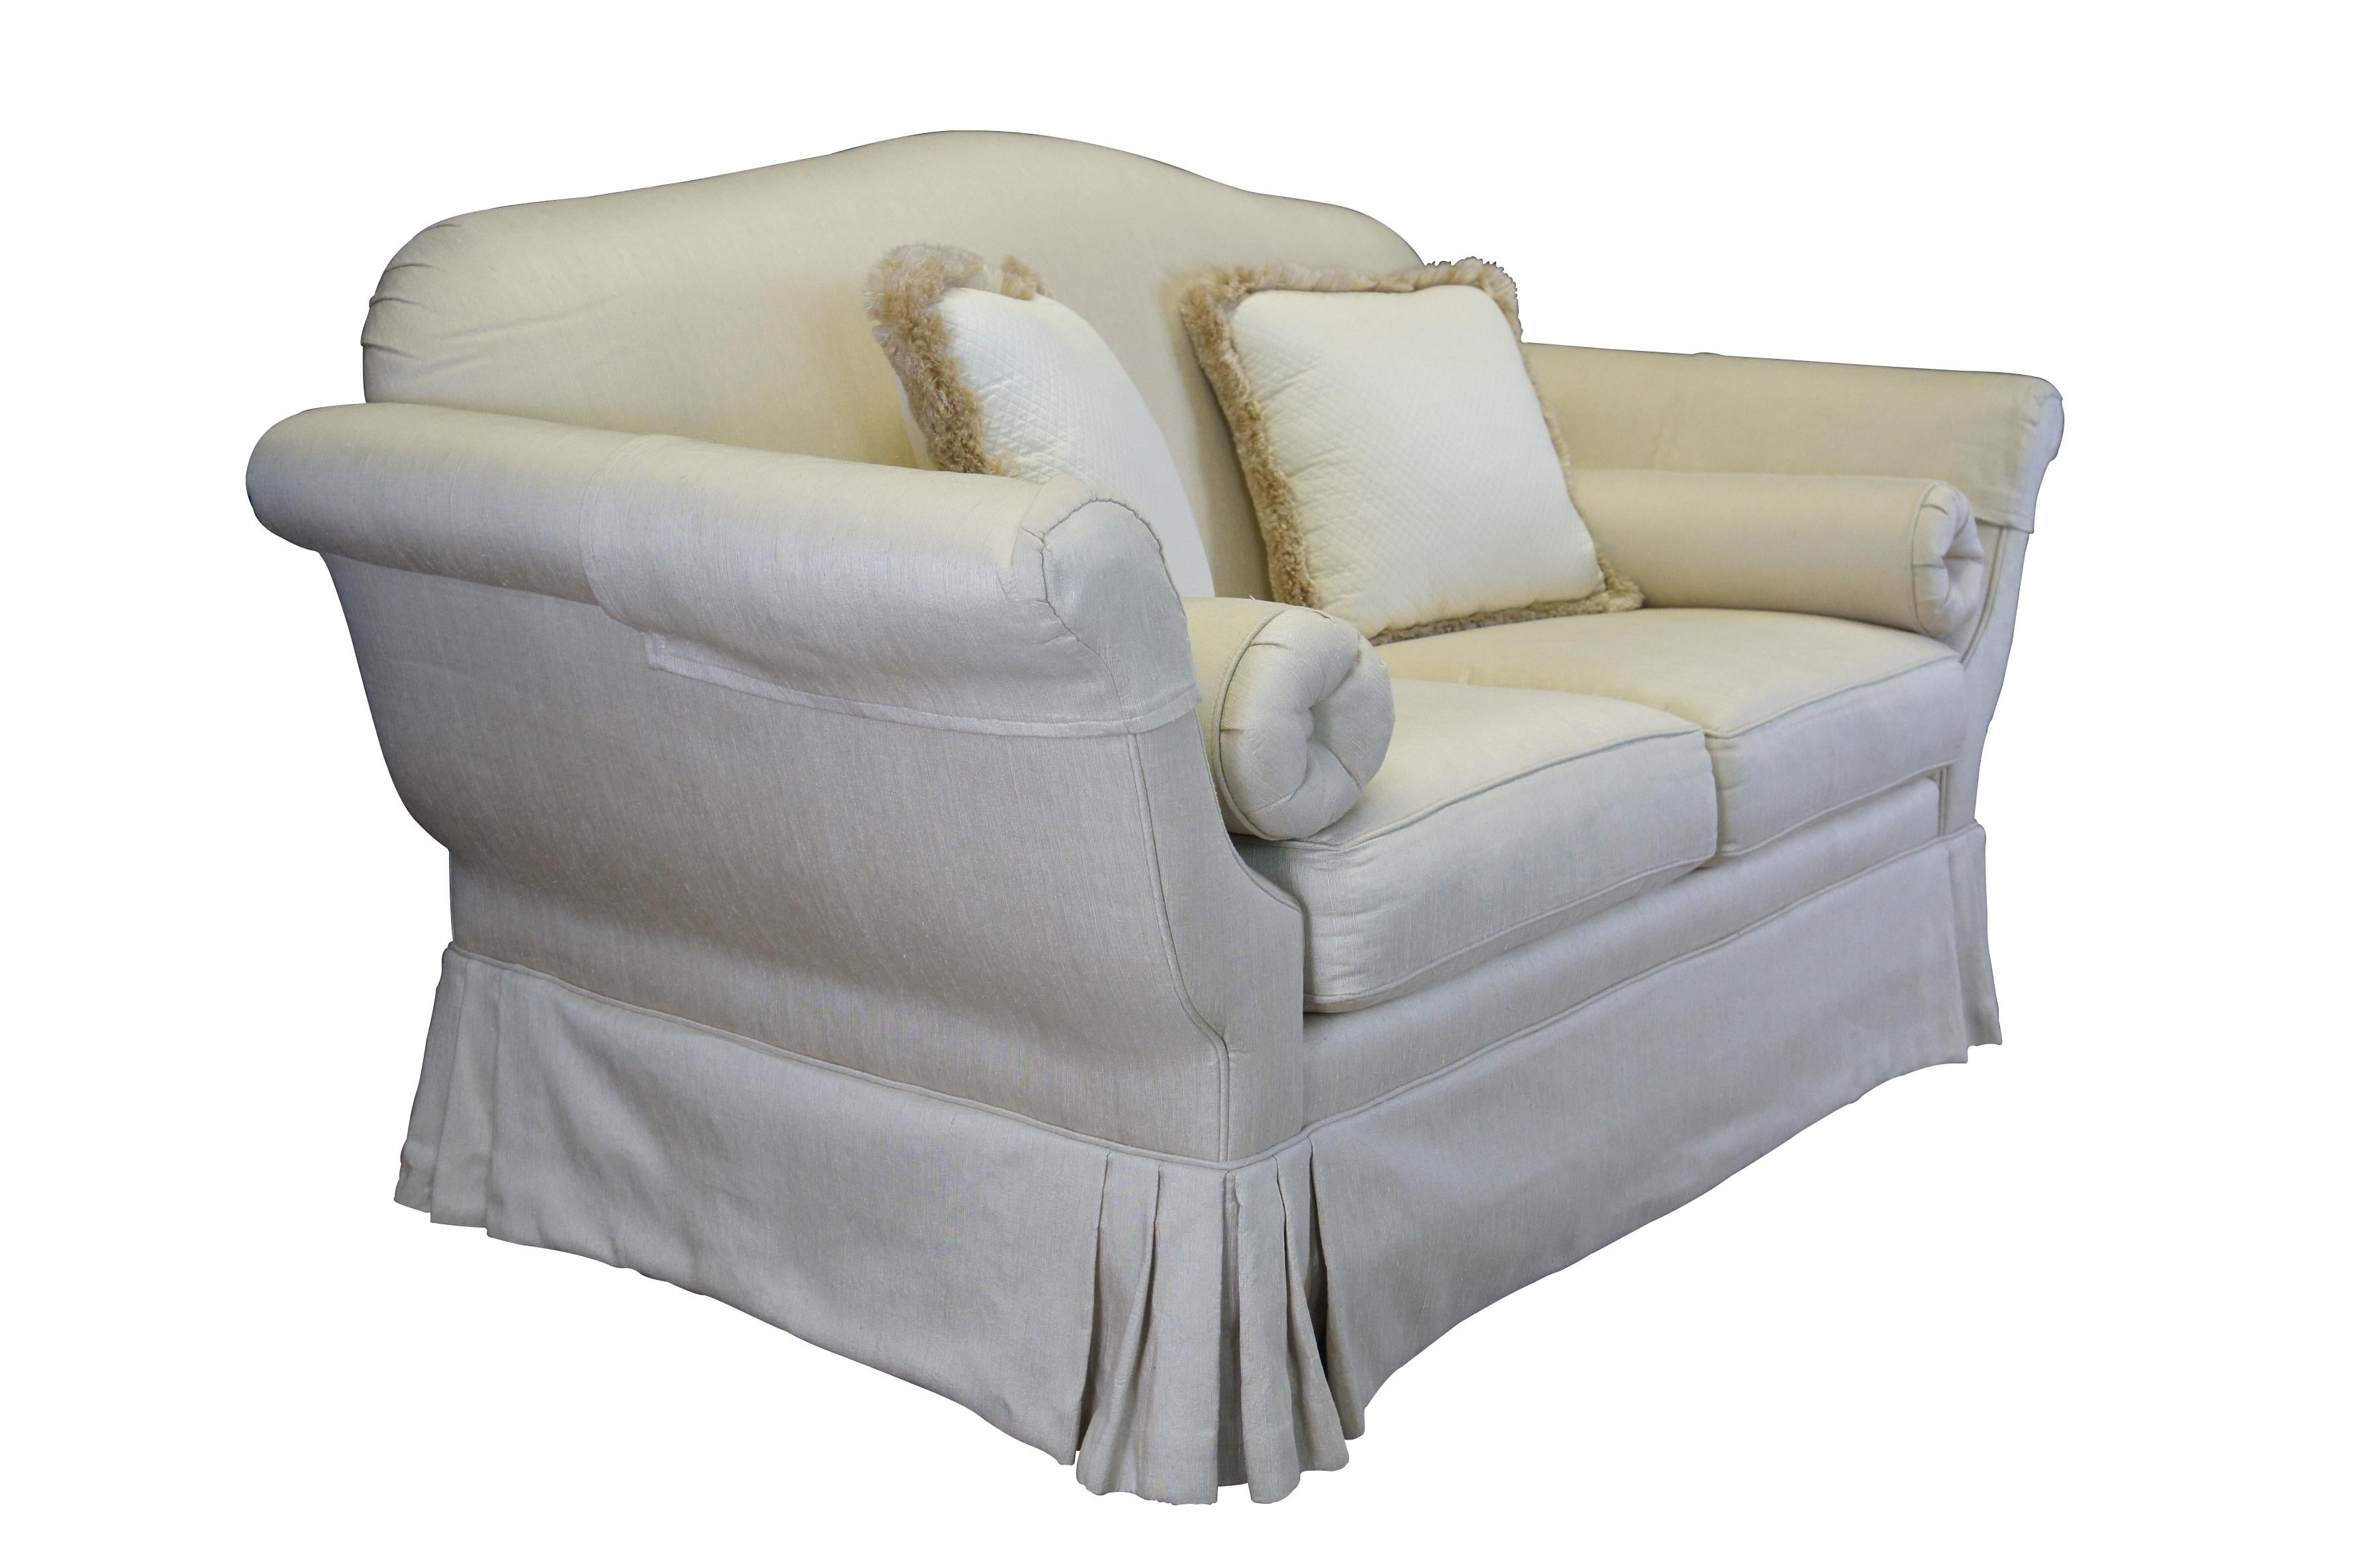 Vintage silk down filled loveseat / settee / sofa or couch featuring a formal tapered chaise lounge design with high rolled arms and arched back over skirted base.  Includes bolster and lumbar pillows.  Off white / beige. Knole inspired French